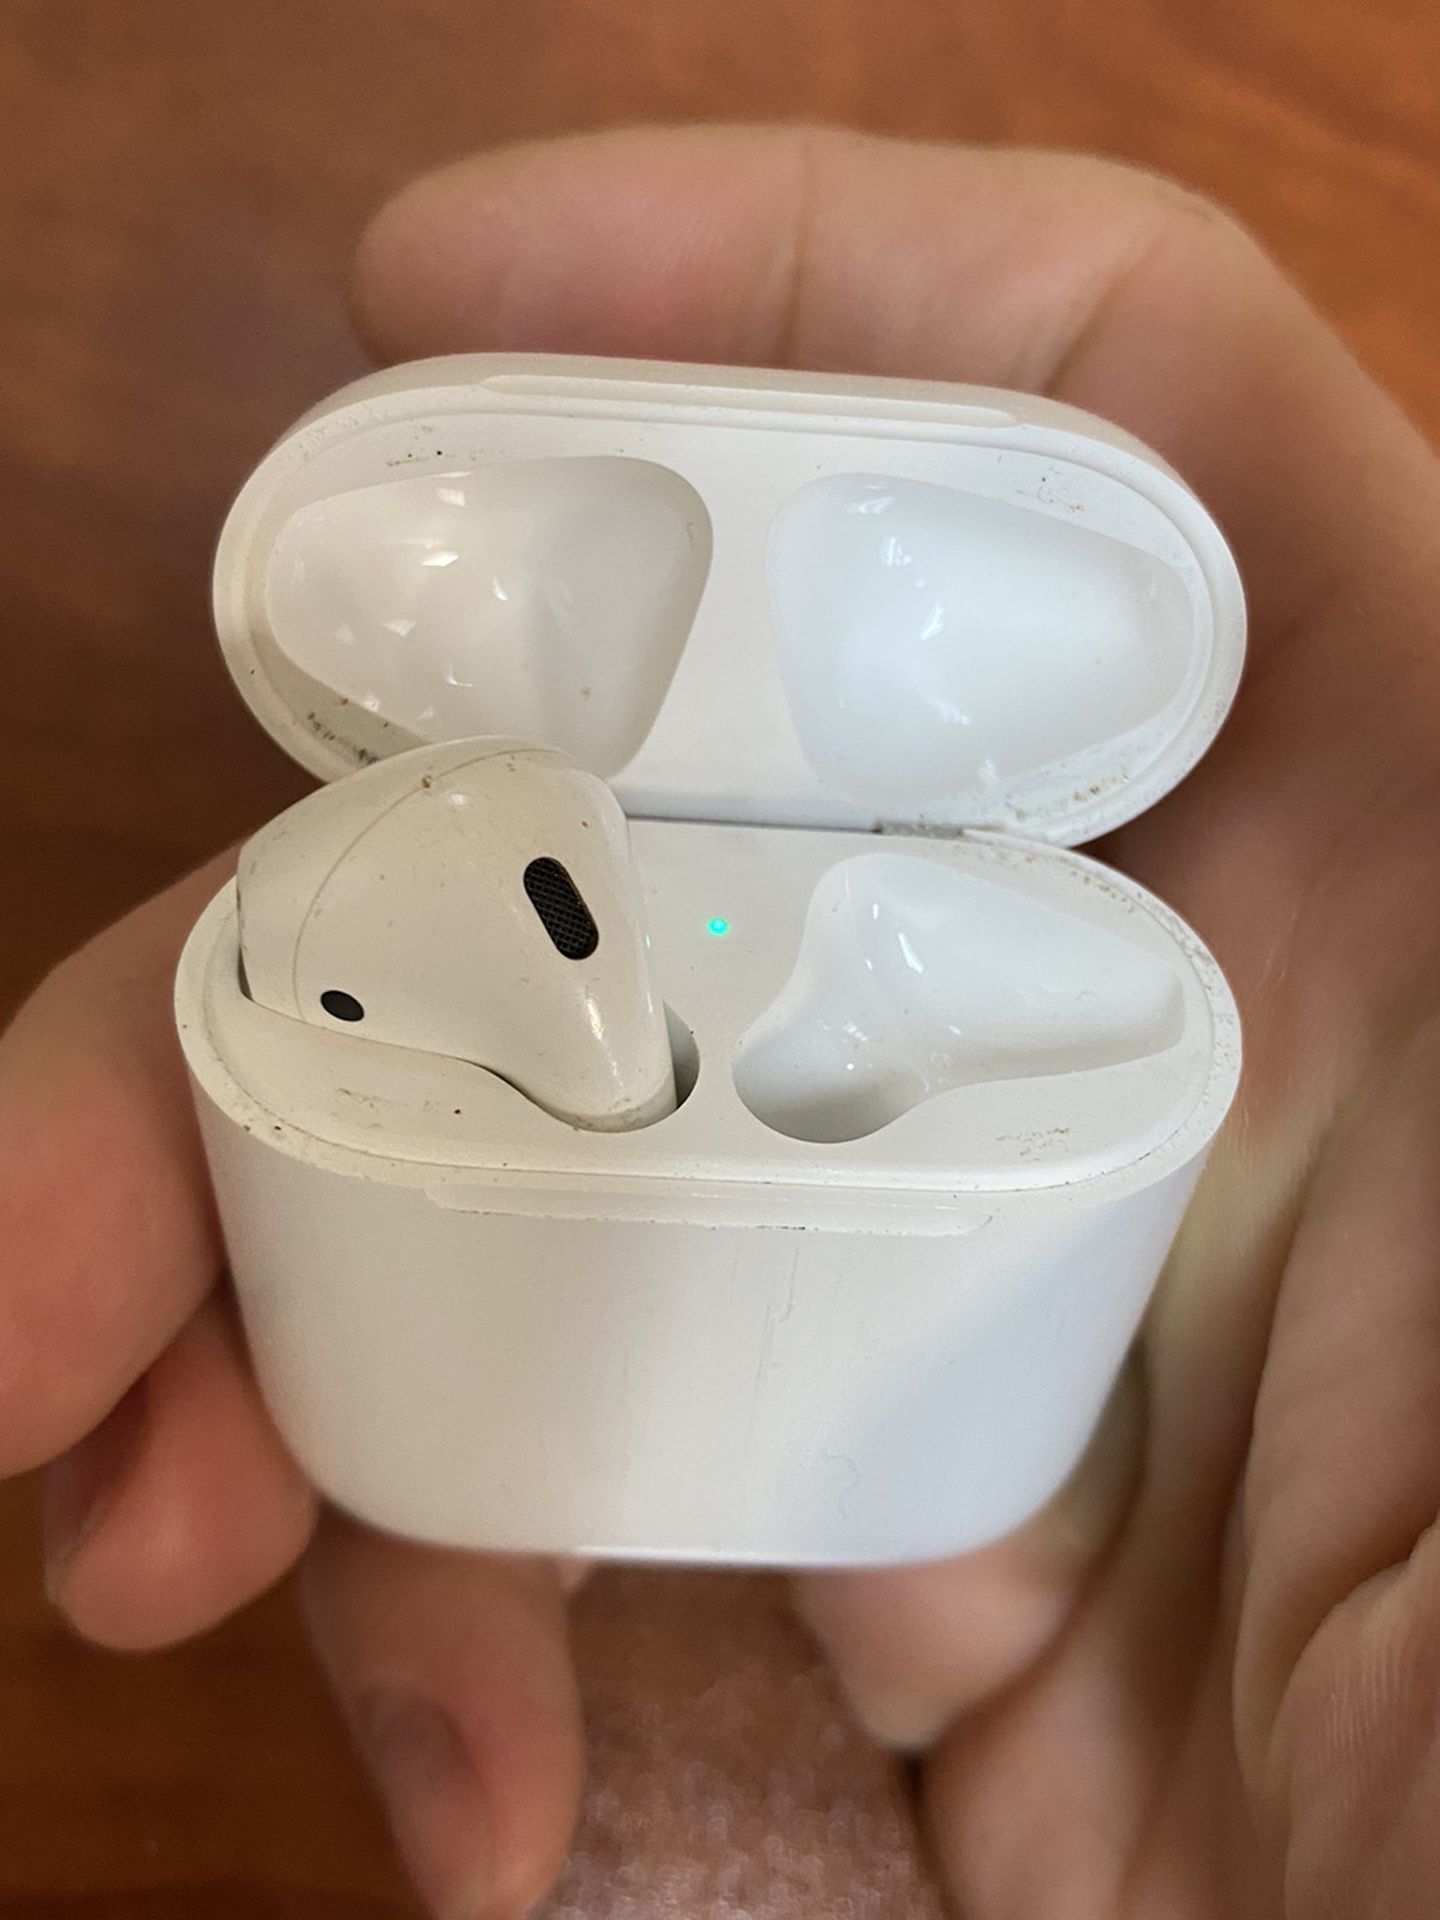 Apple Case With Left Ear Bud / Working